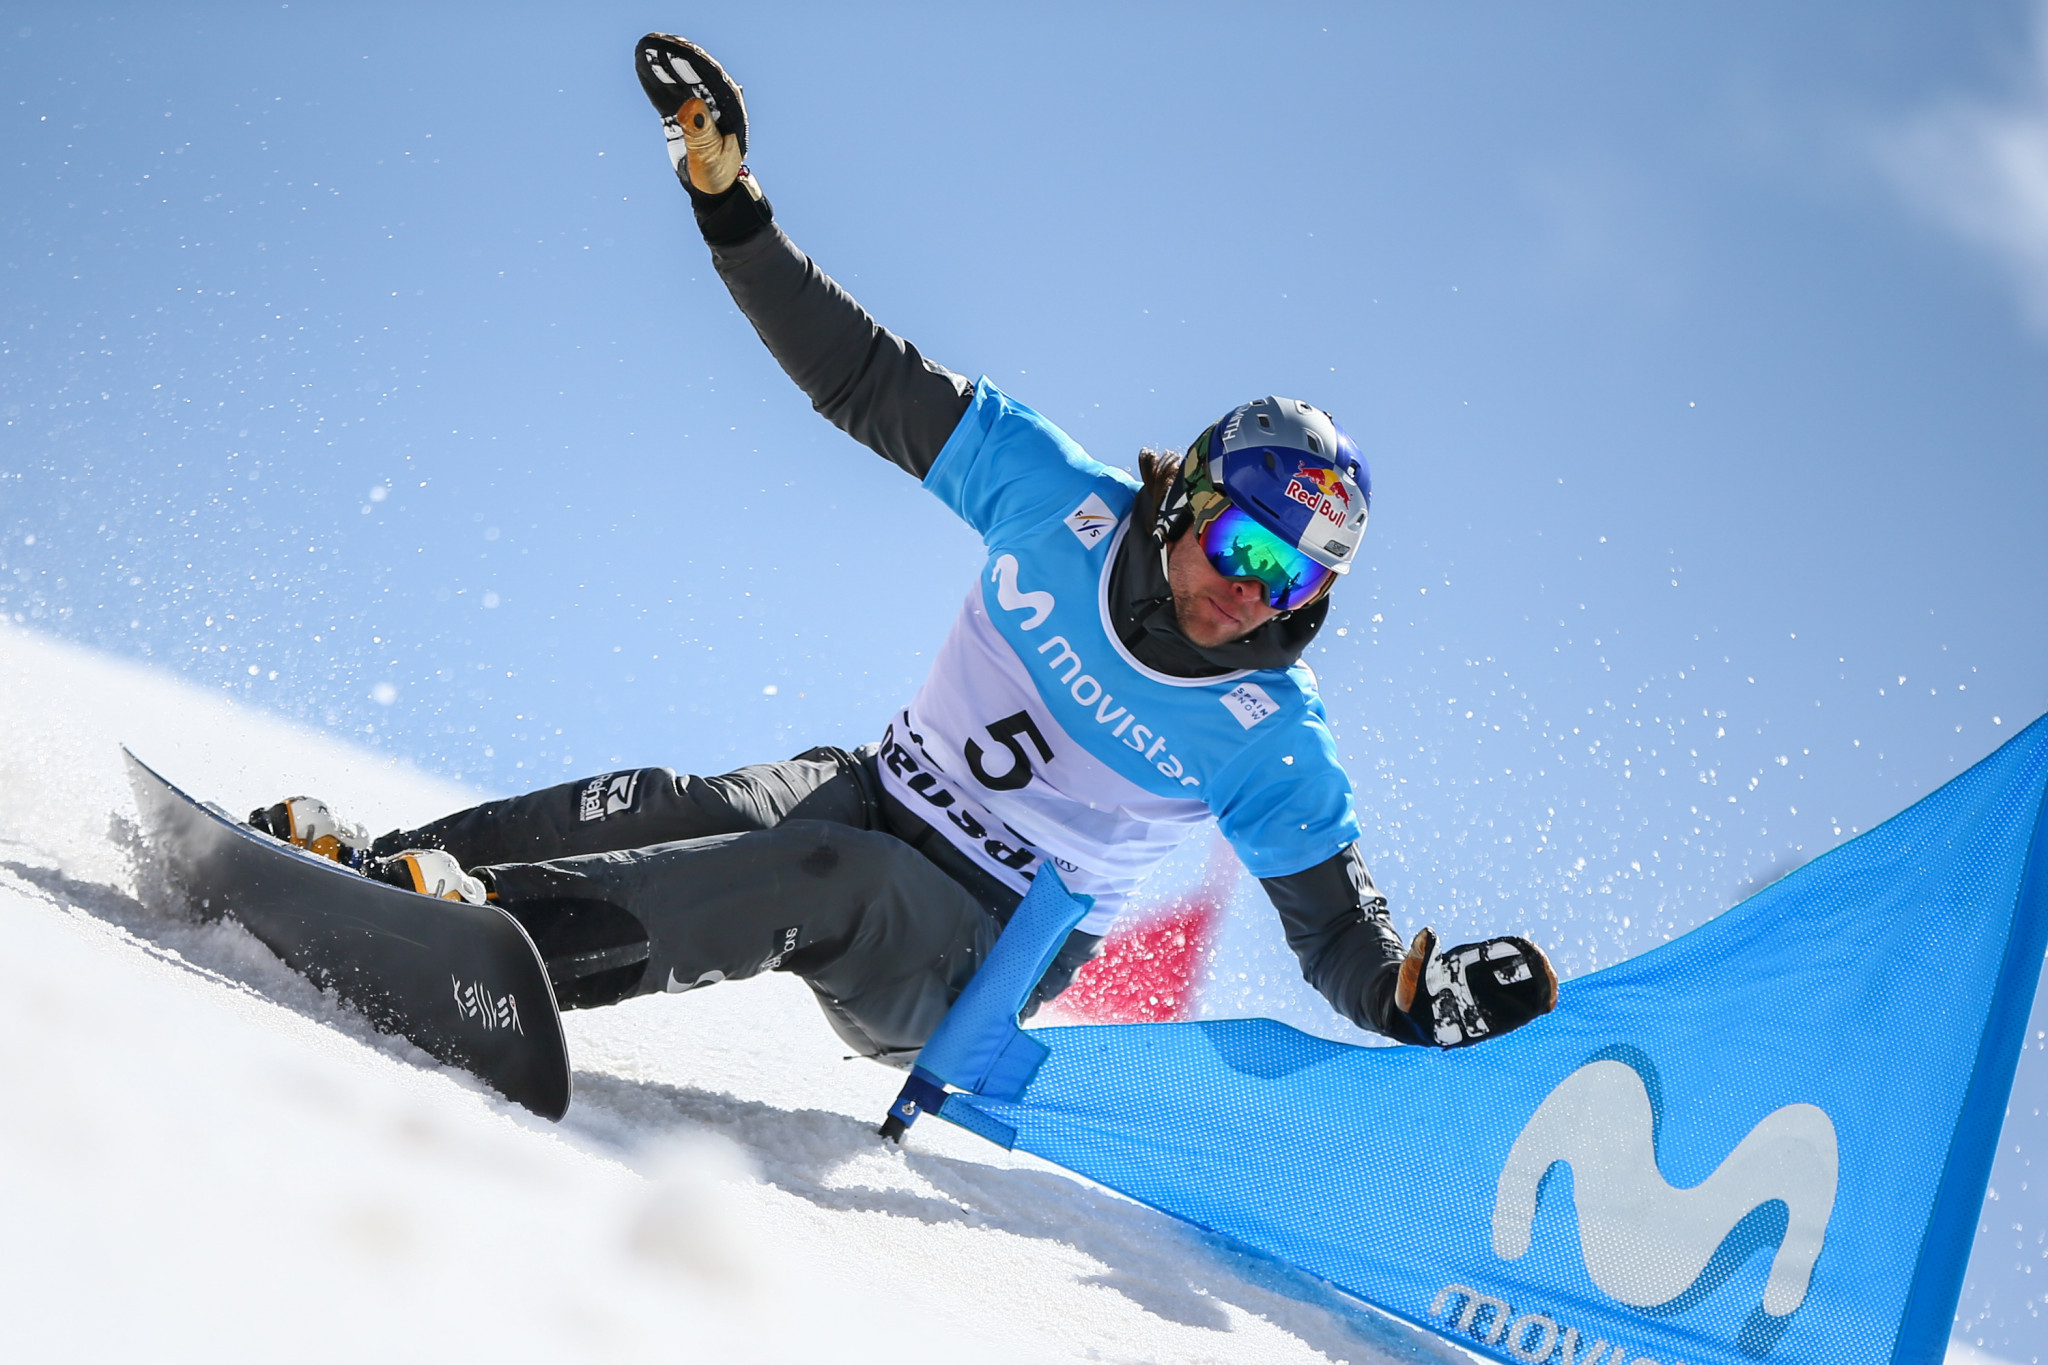 France dominate FIS Snowboard Cross World Cup team event